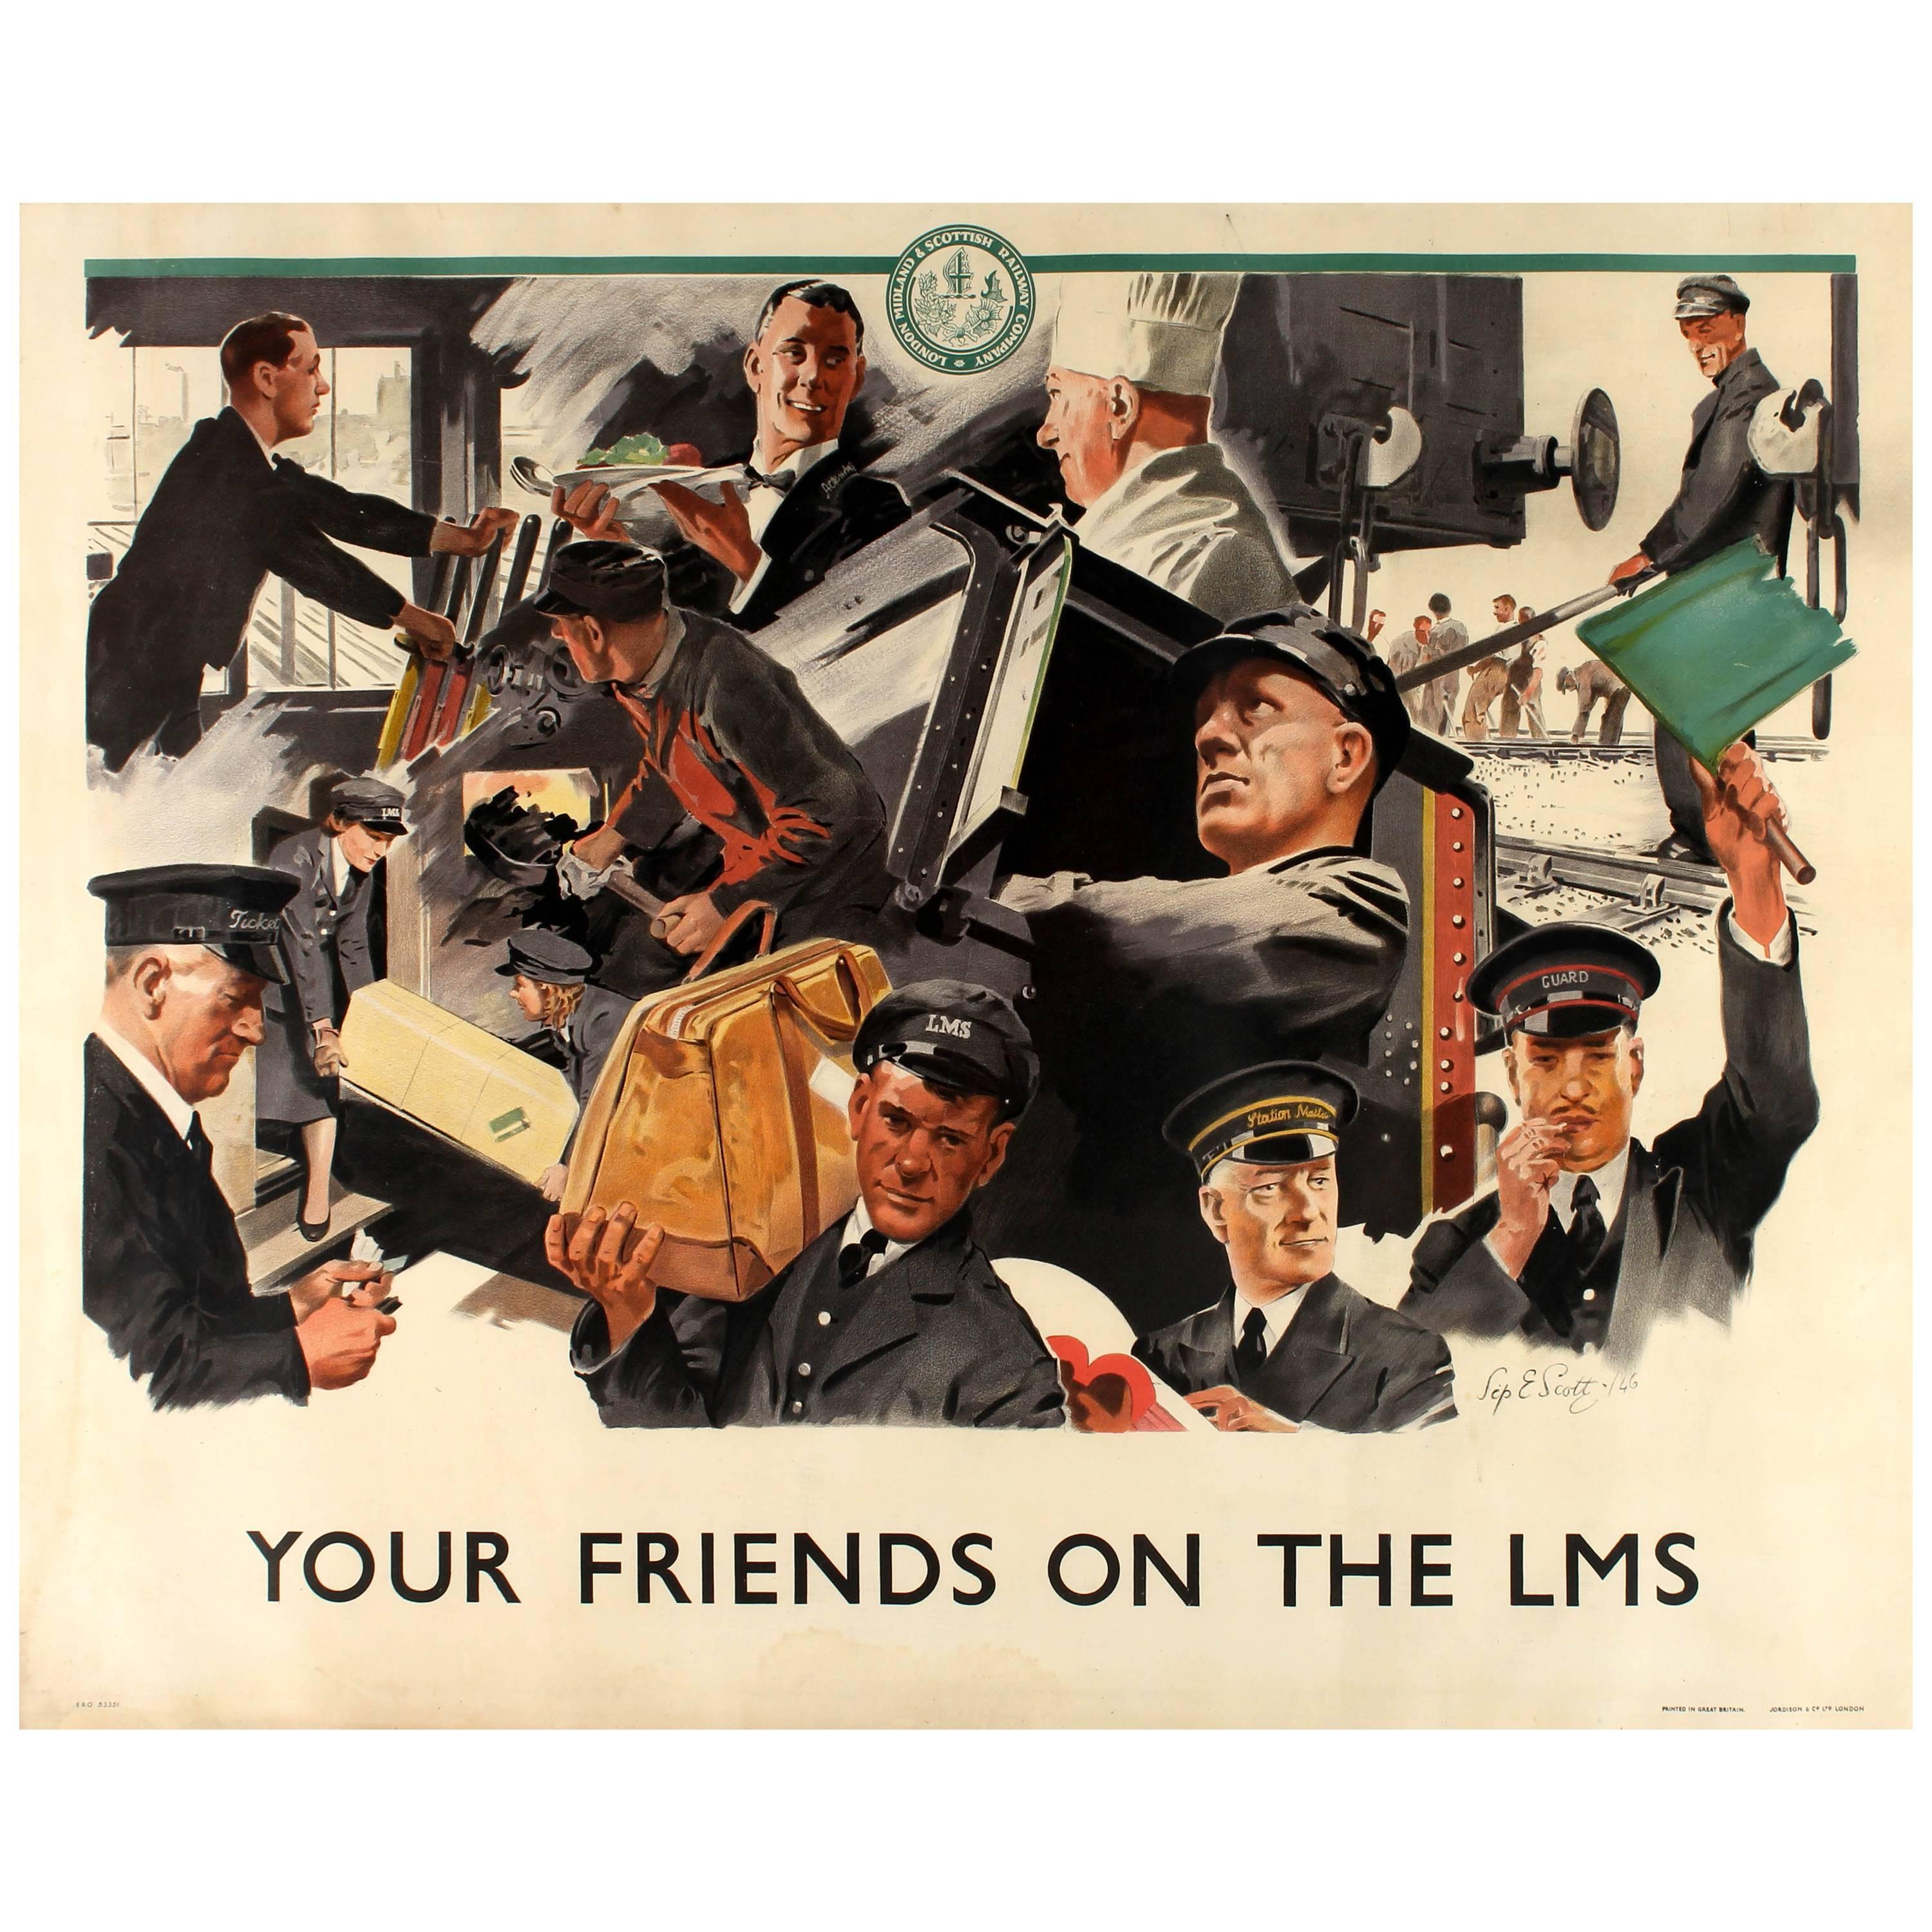 Original London Midland and Scottish Railway Poster "Your Friends On The LMS" For Sale